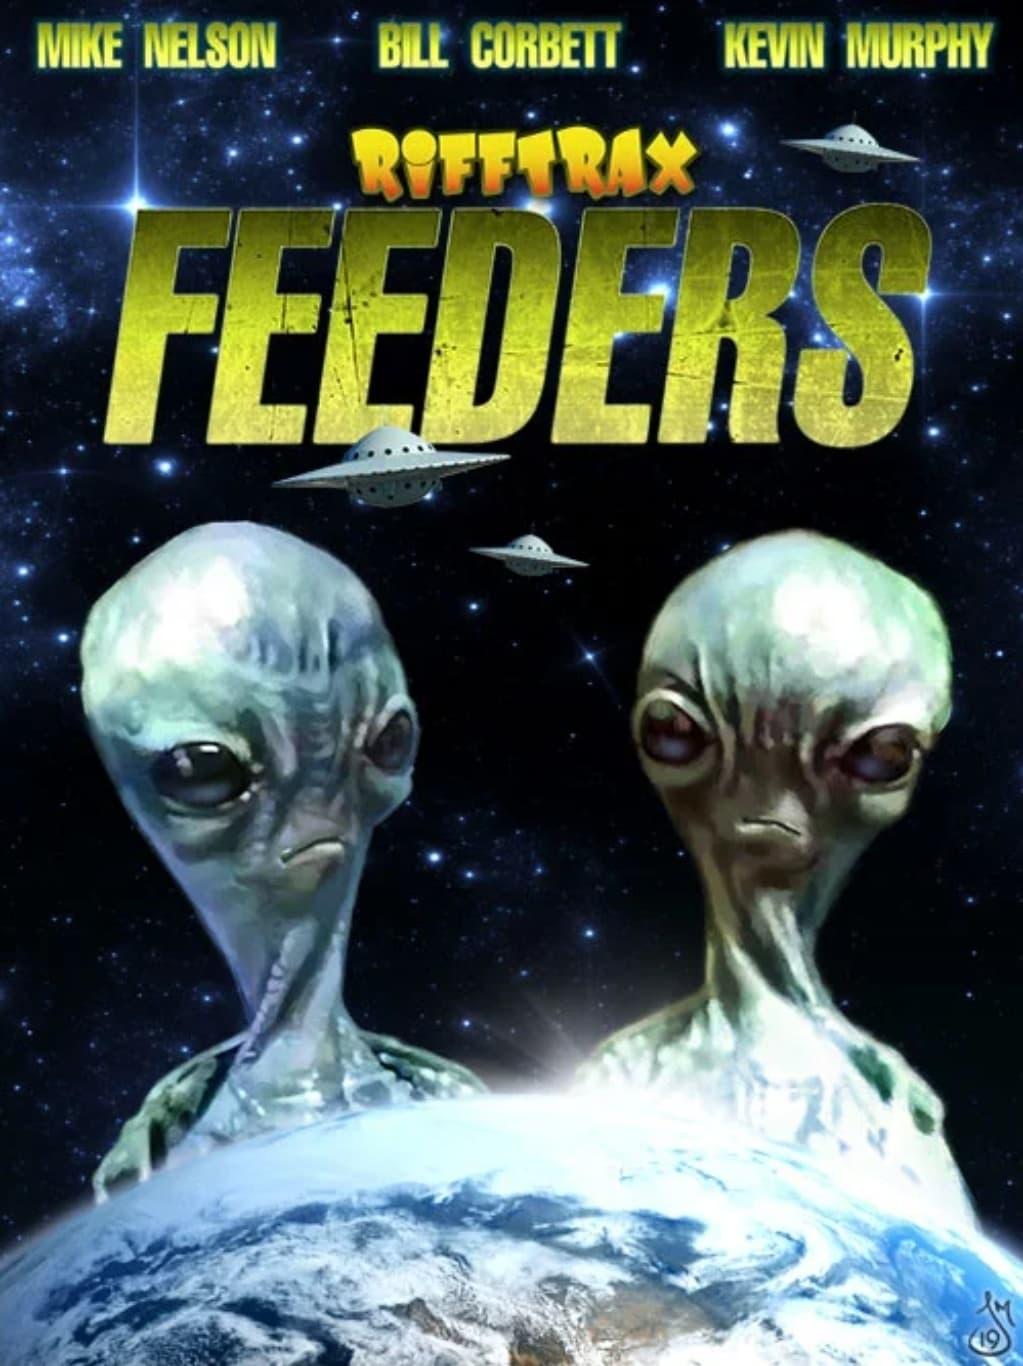 Feeders poster